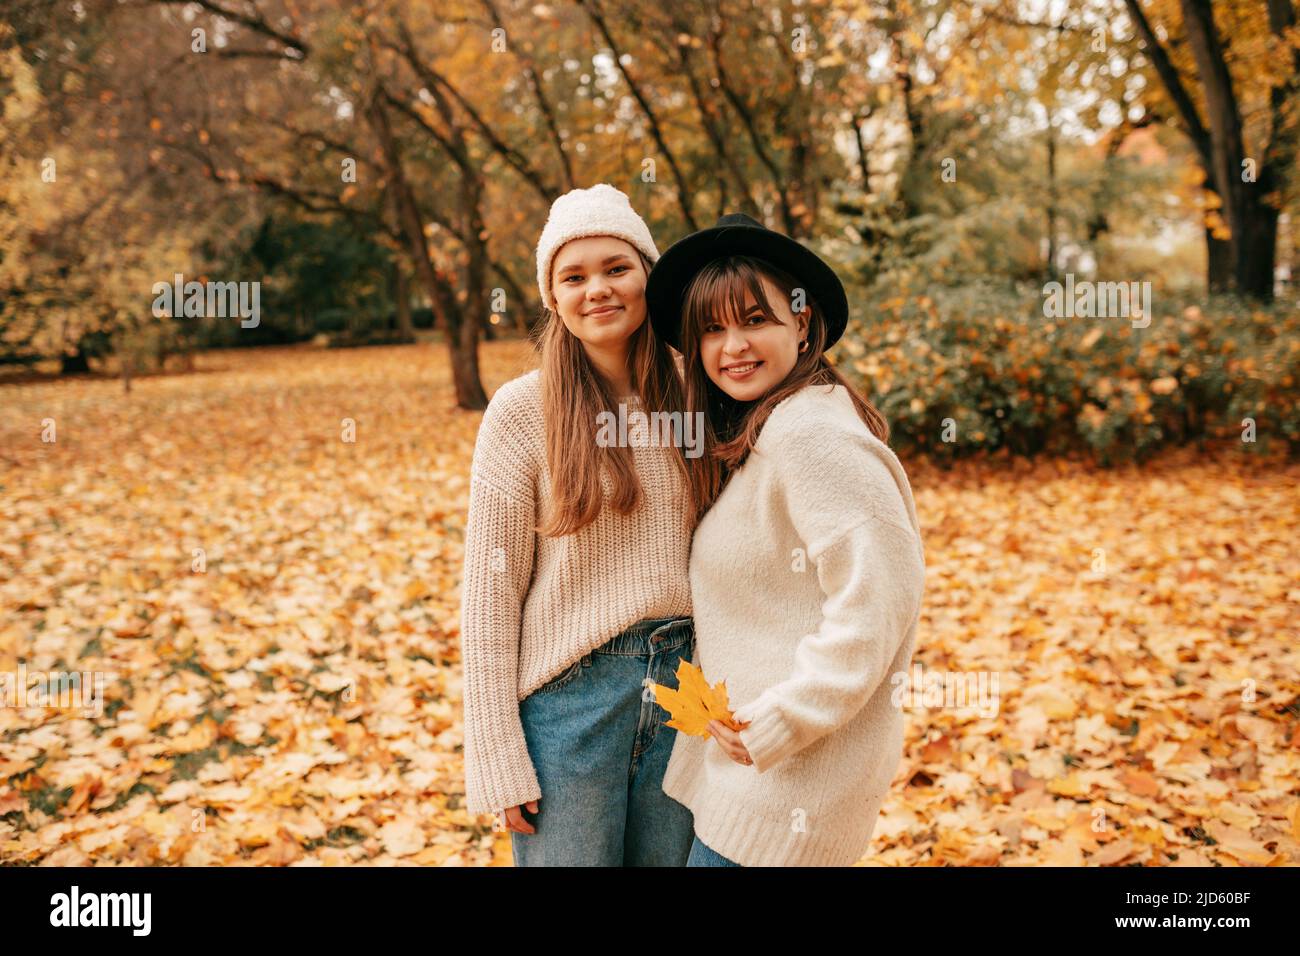 Female friendship. Portrait of autumn time in park among pile of fallen leaves of two happy young women standing embracing. Fun vacation. Weekend Stock Photo